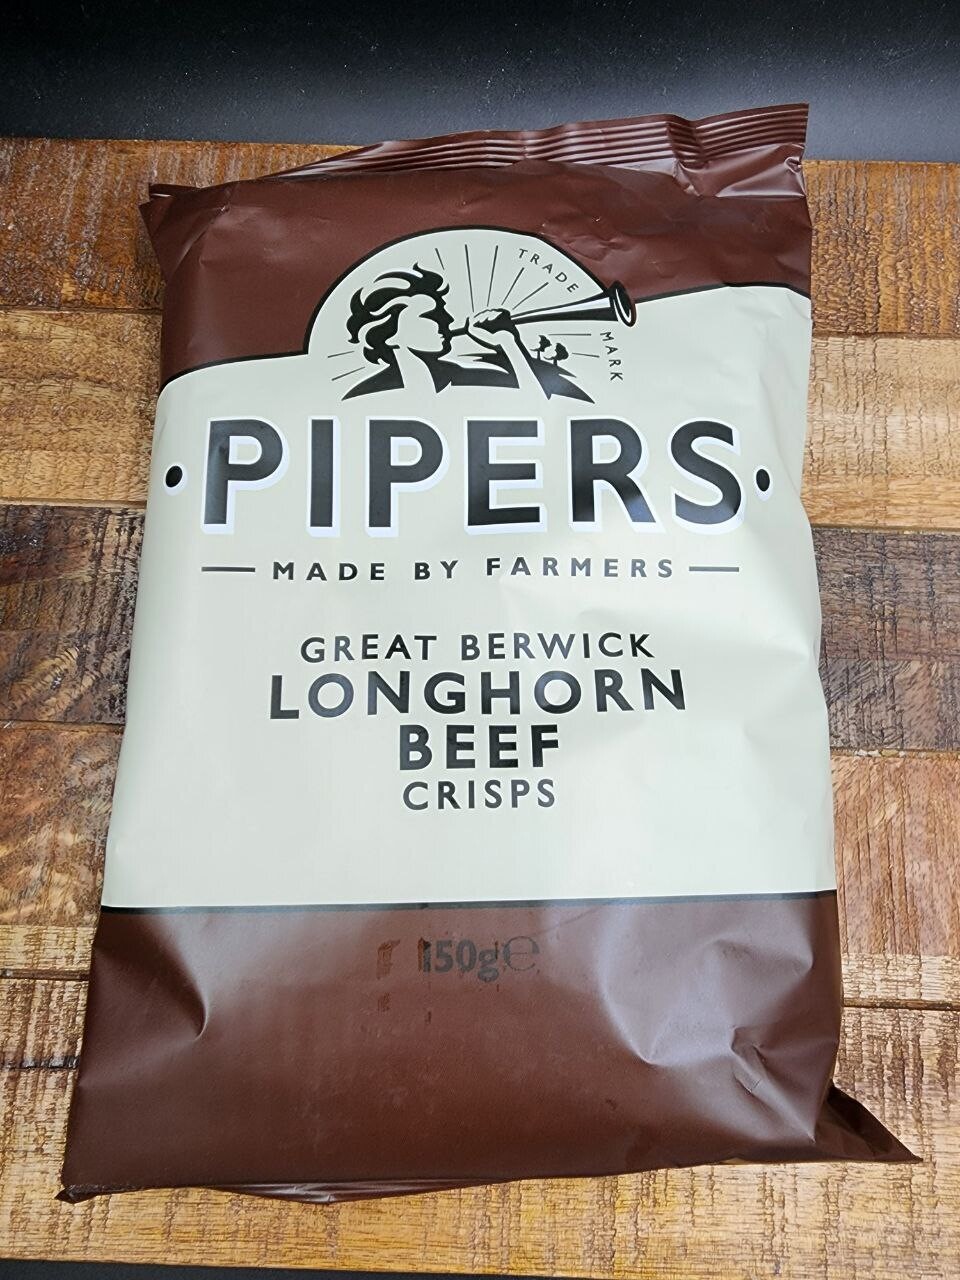 Pipers Longhorn Beef Past Date Promo